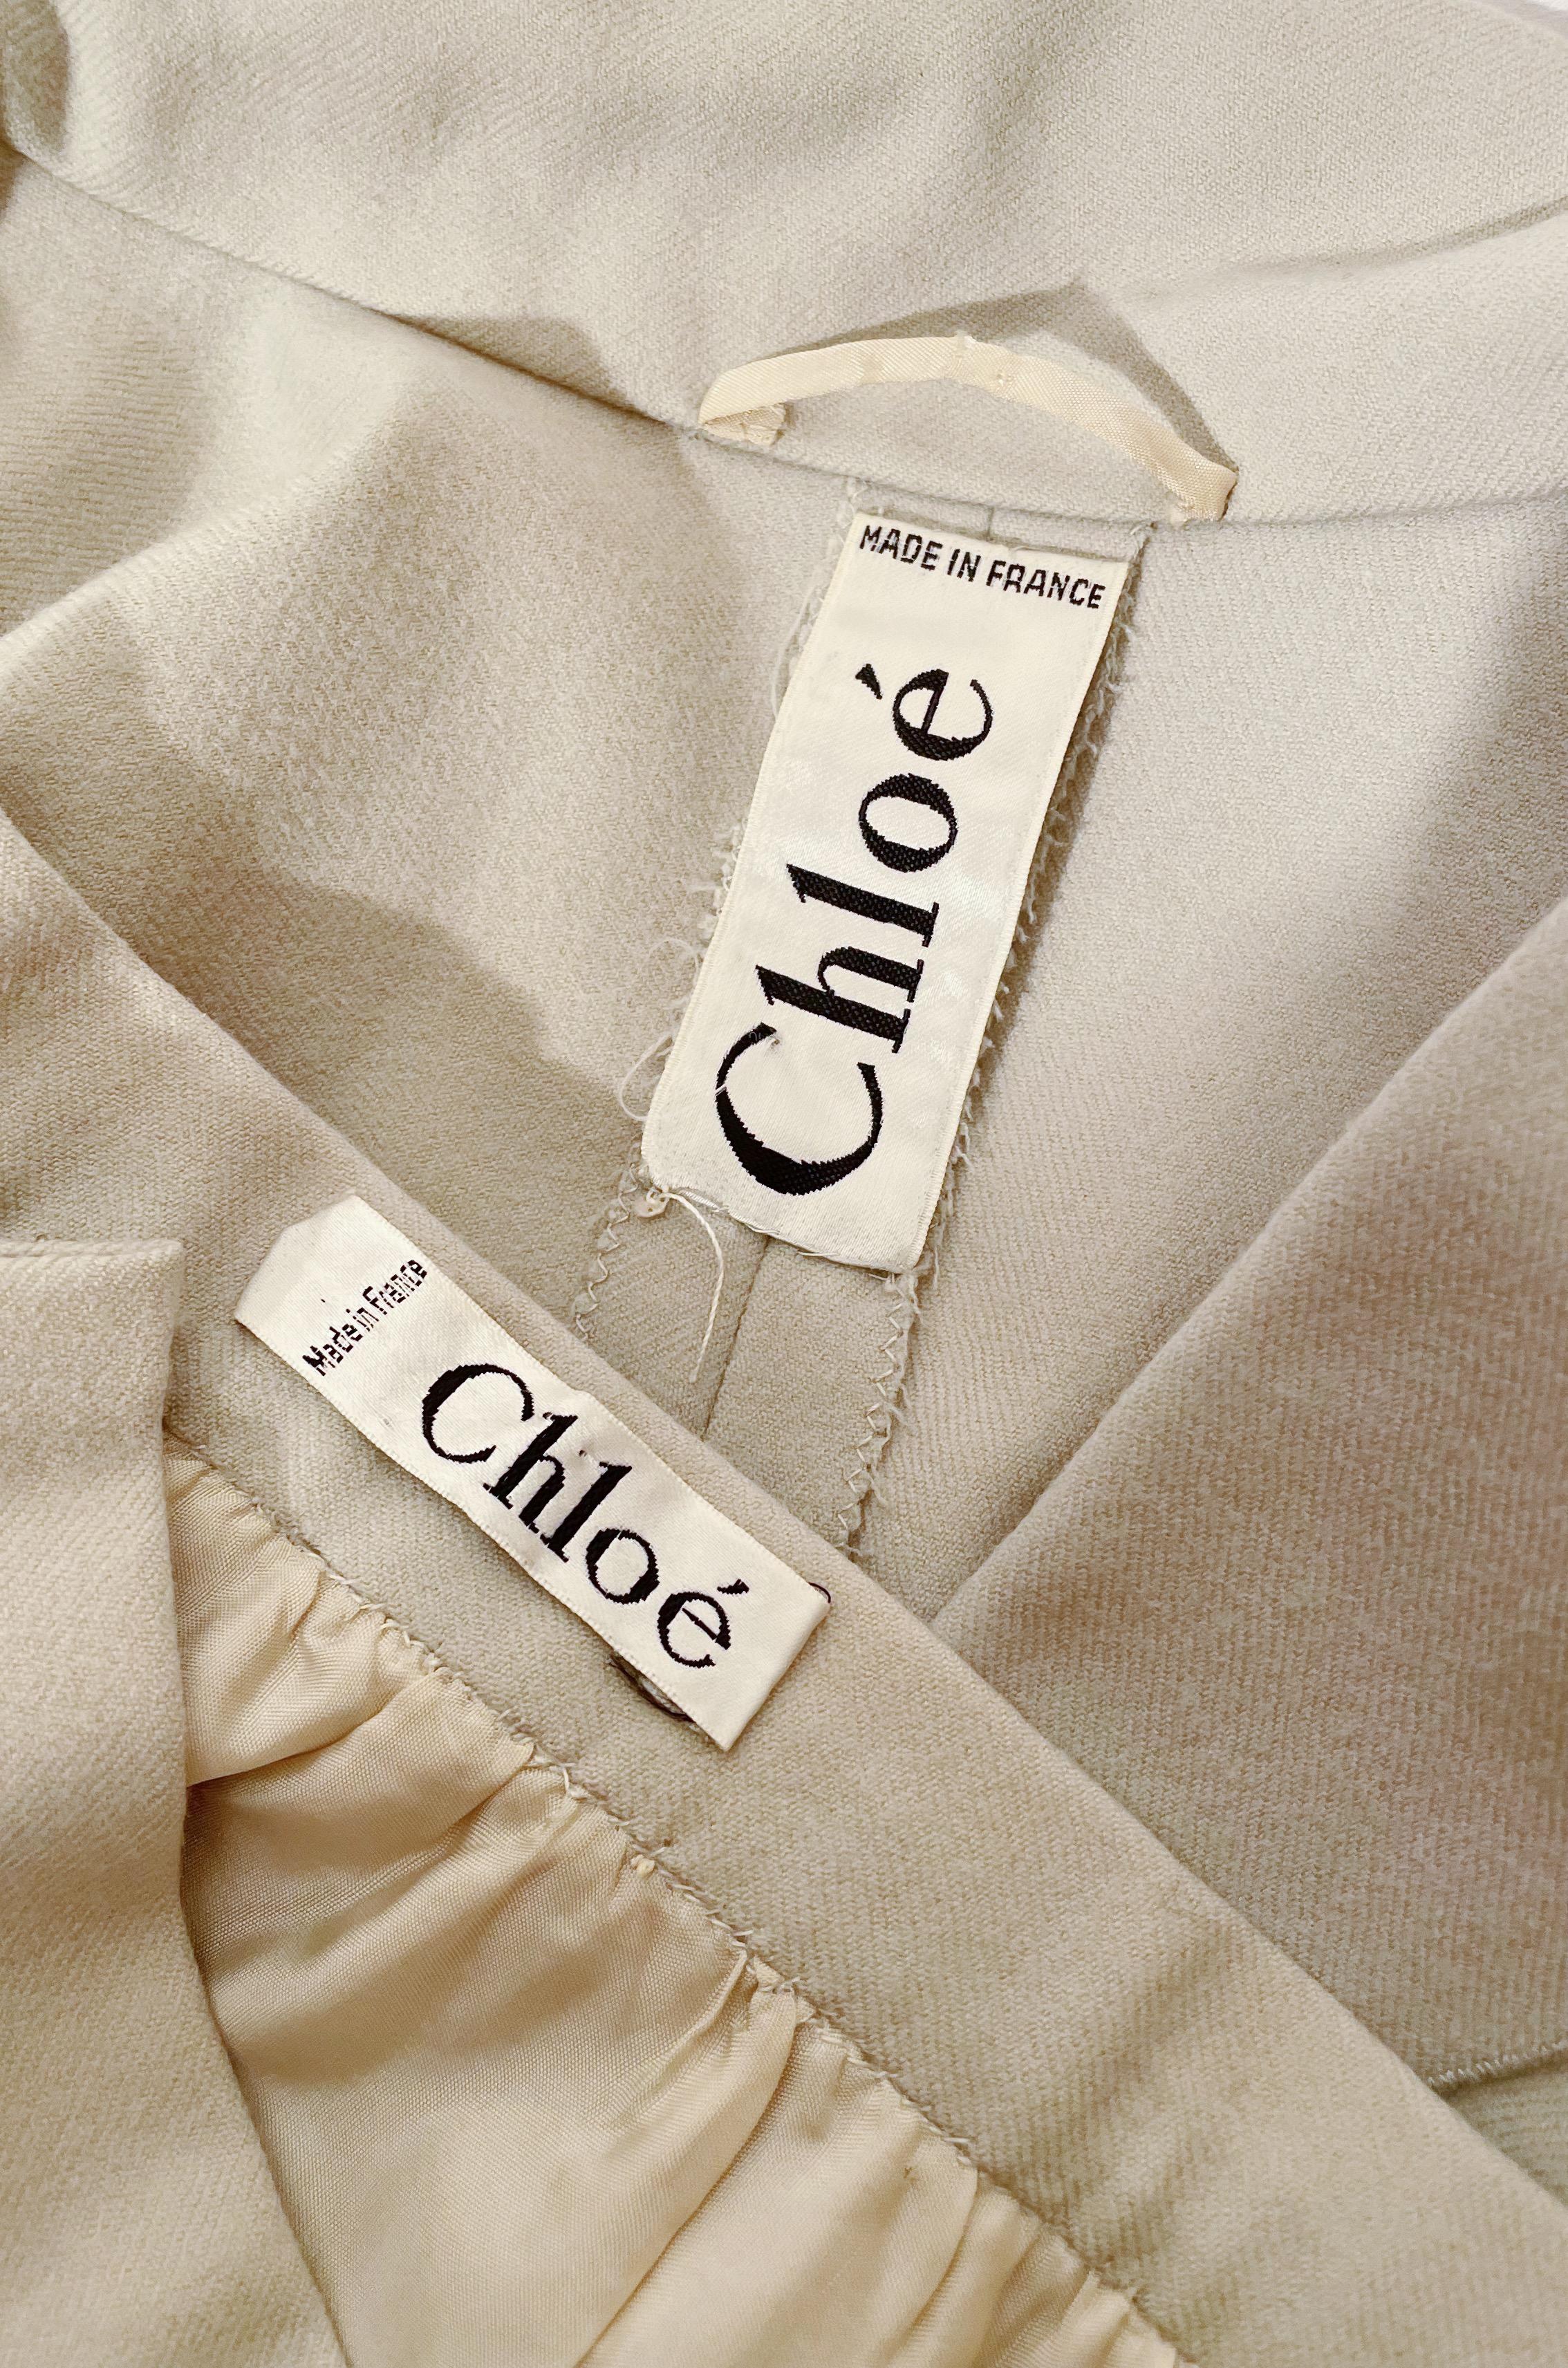 Chloe Blouse and Skirt Set  For Sale 2